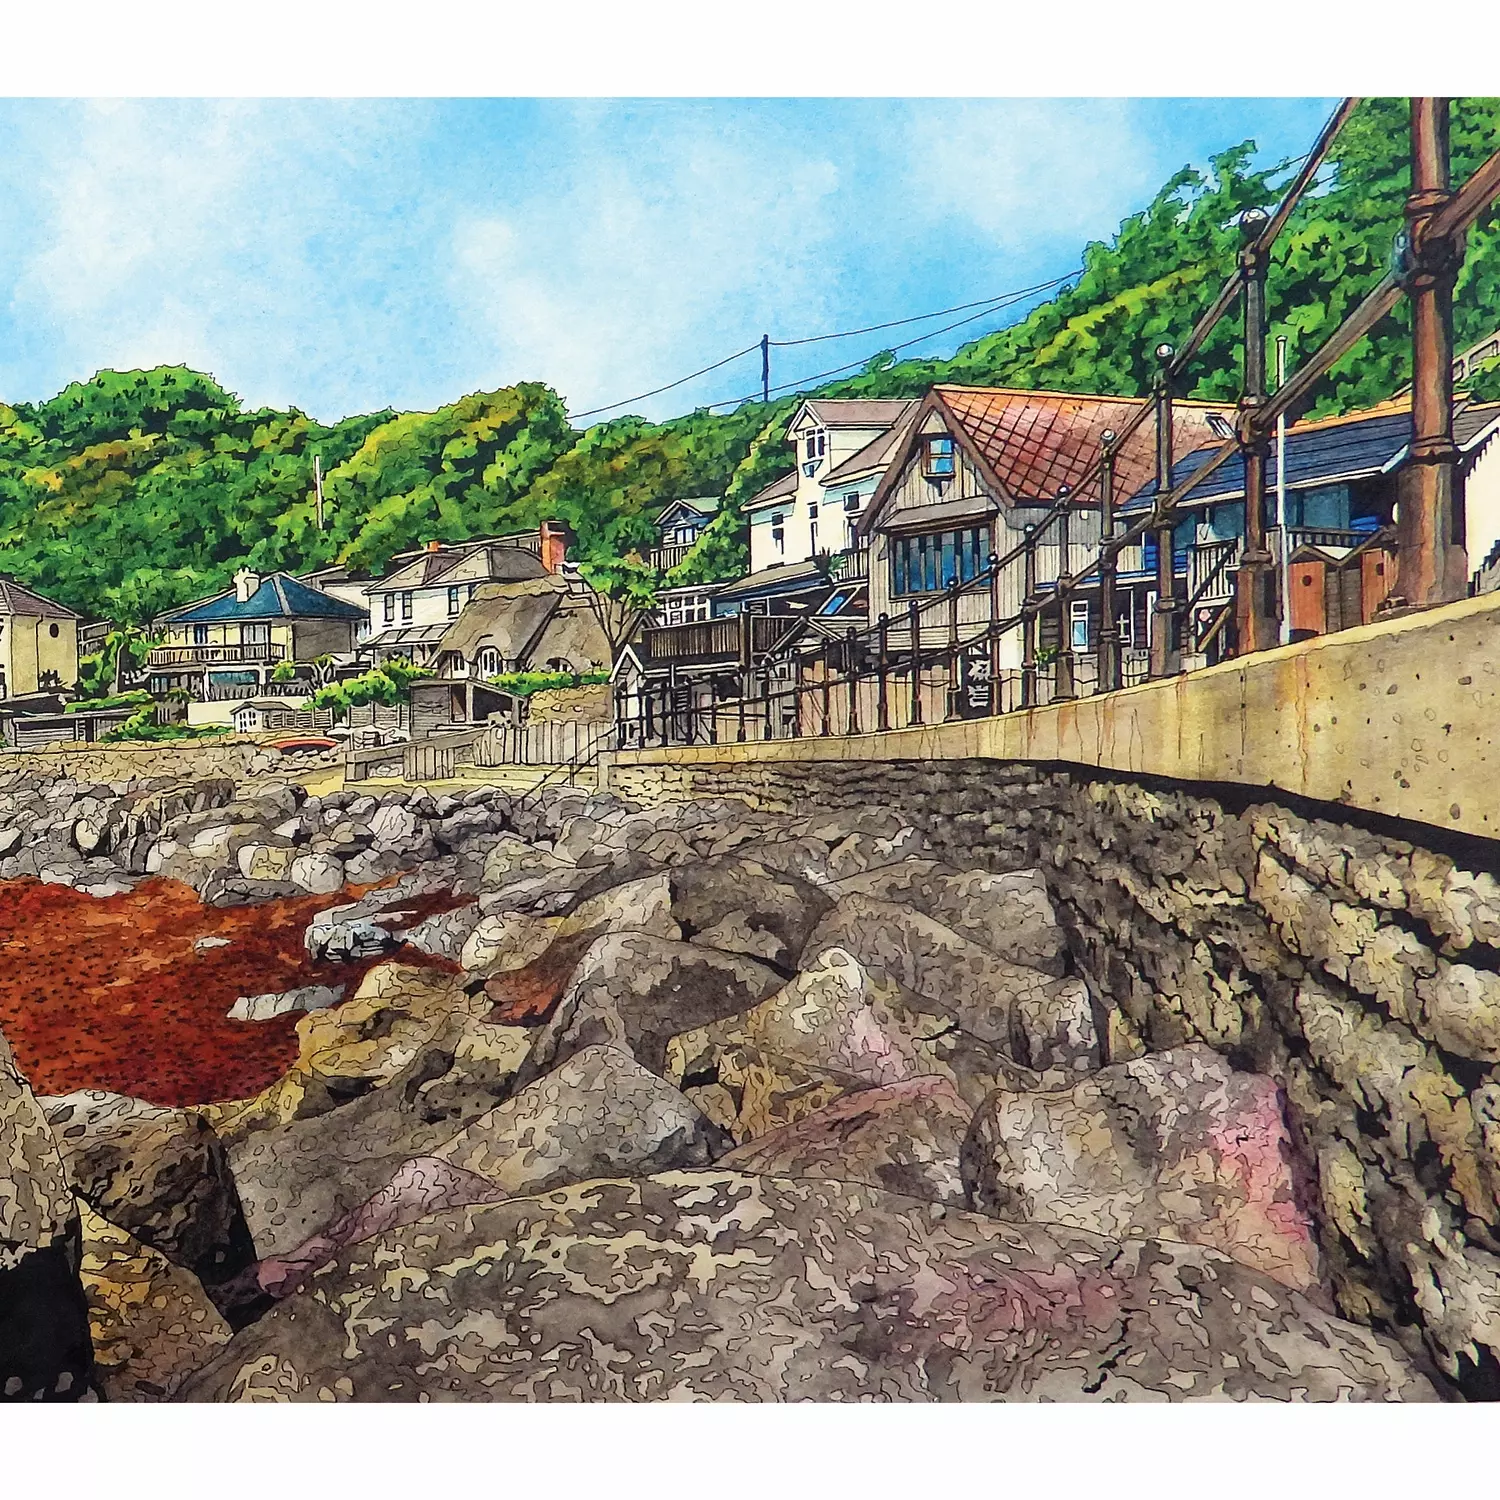 Steephill Cove in Pen & Ink and Watercolour